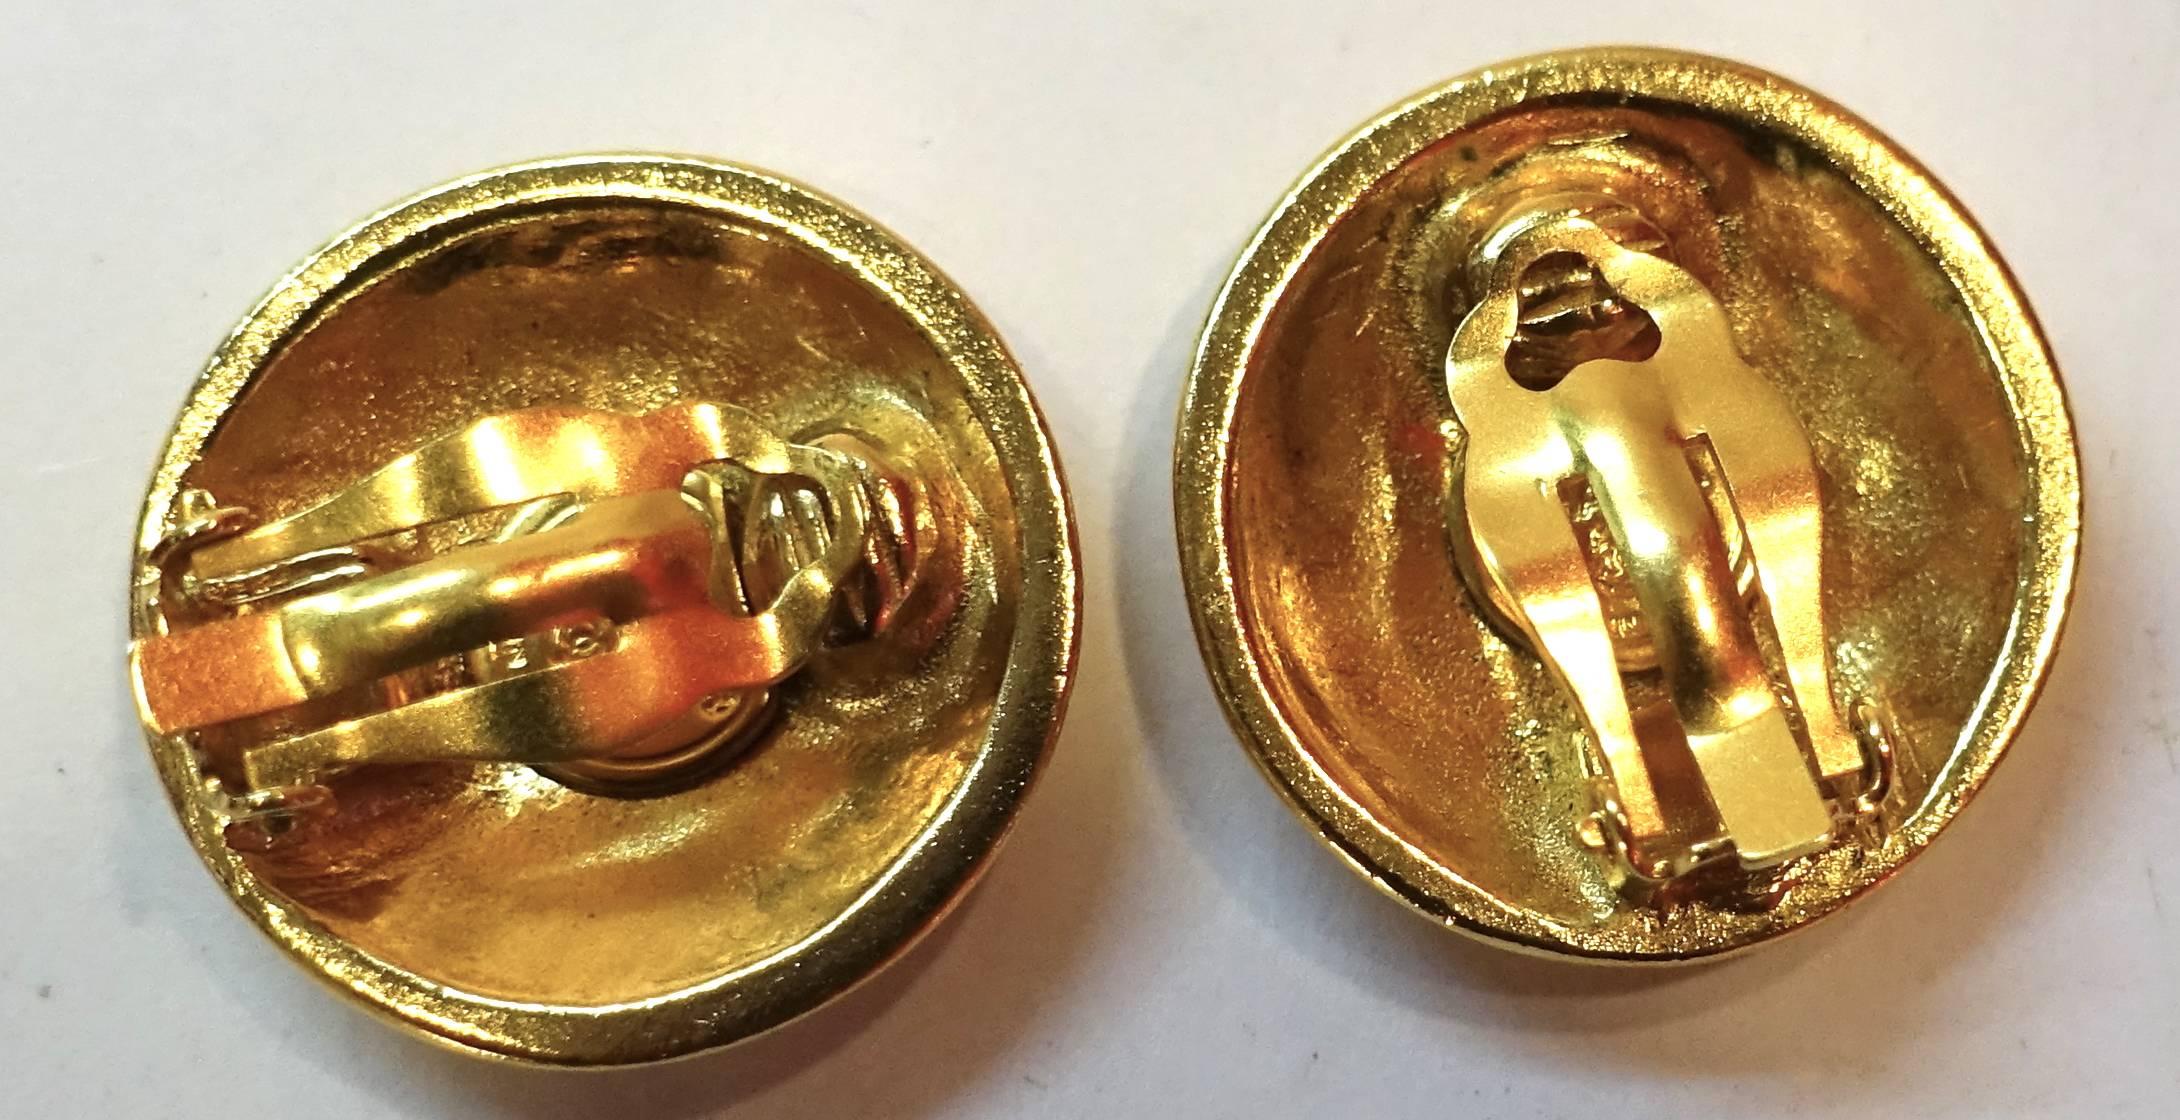 These vintage round Chanel clip earrings have the double Cs intertwined with each other on a gold plated metal finish. They measure 1-1/4” and signed “Chanel Made in France”.  These earrings are in excellent condition.